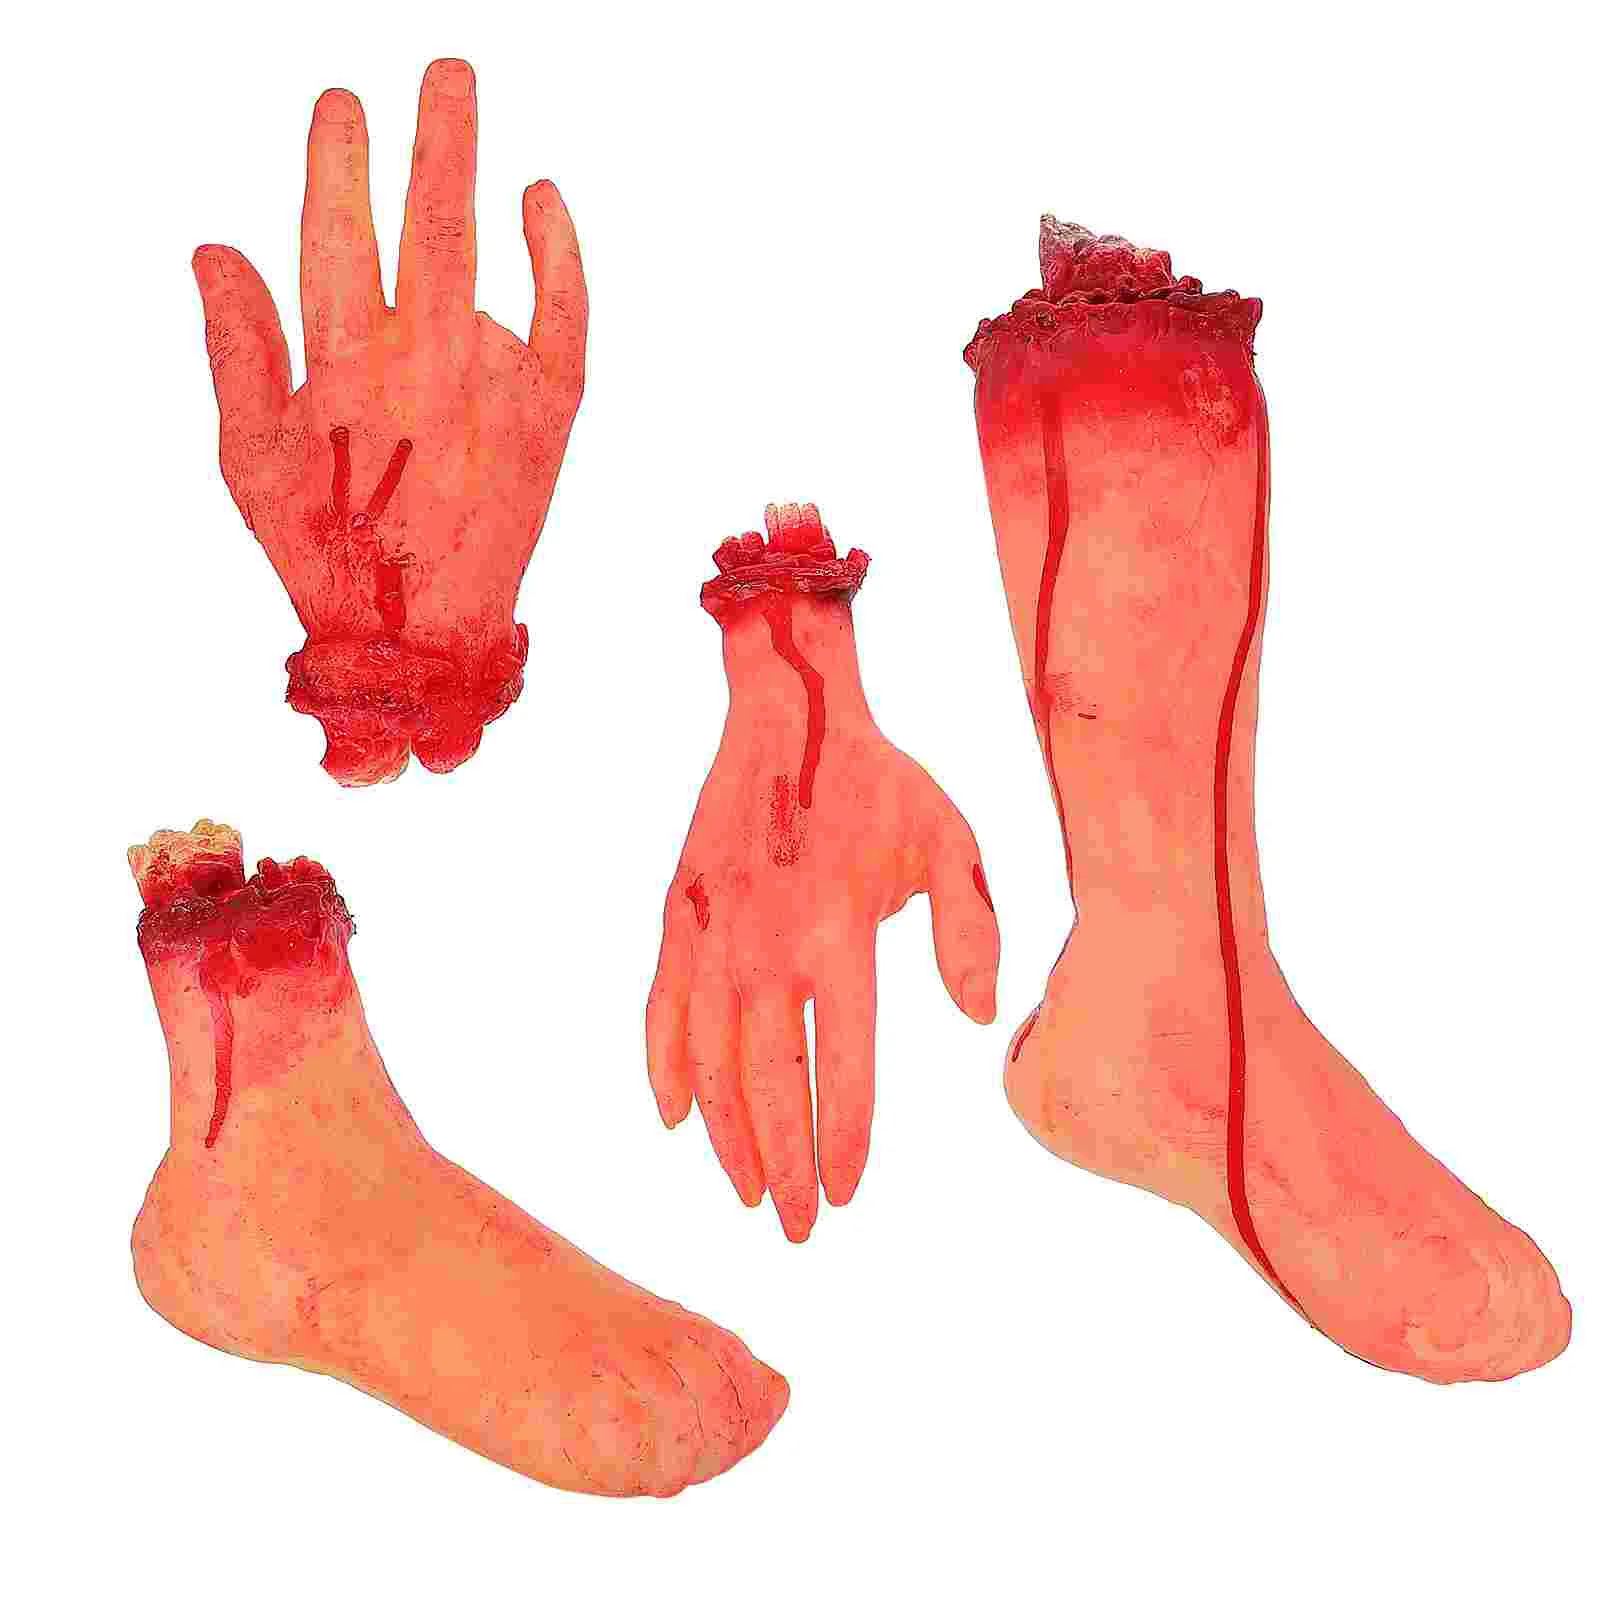 

4 Pcs Halloween Props Simulation Severed Limbs Broken Body Parts Haunted House Prank Decoration Festival Scary Tricky